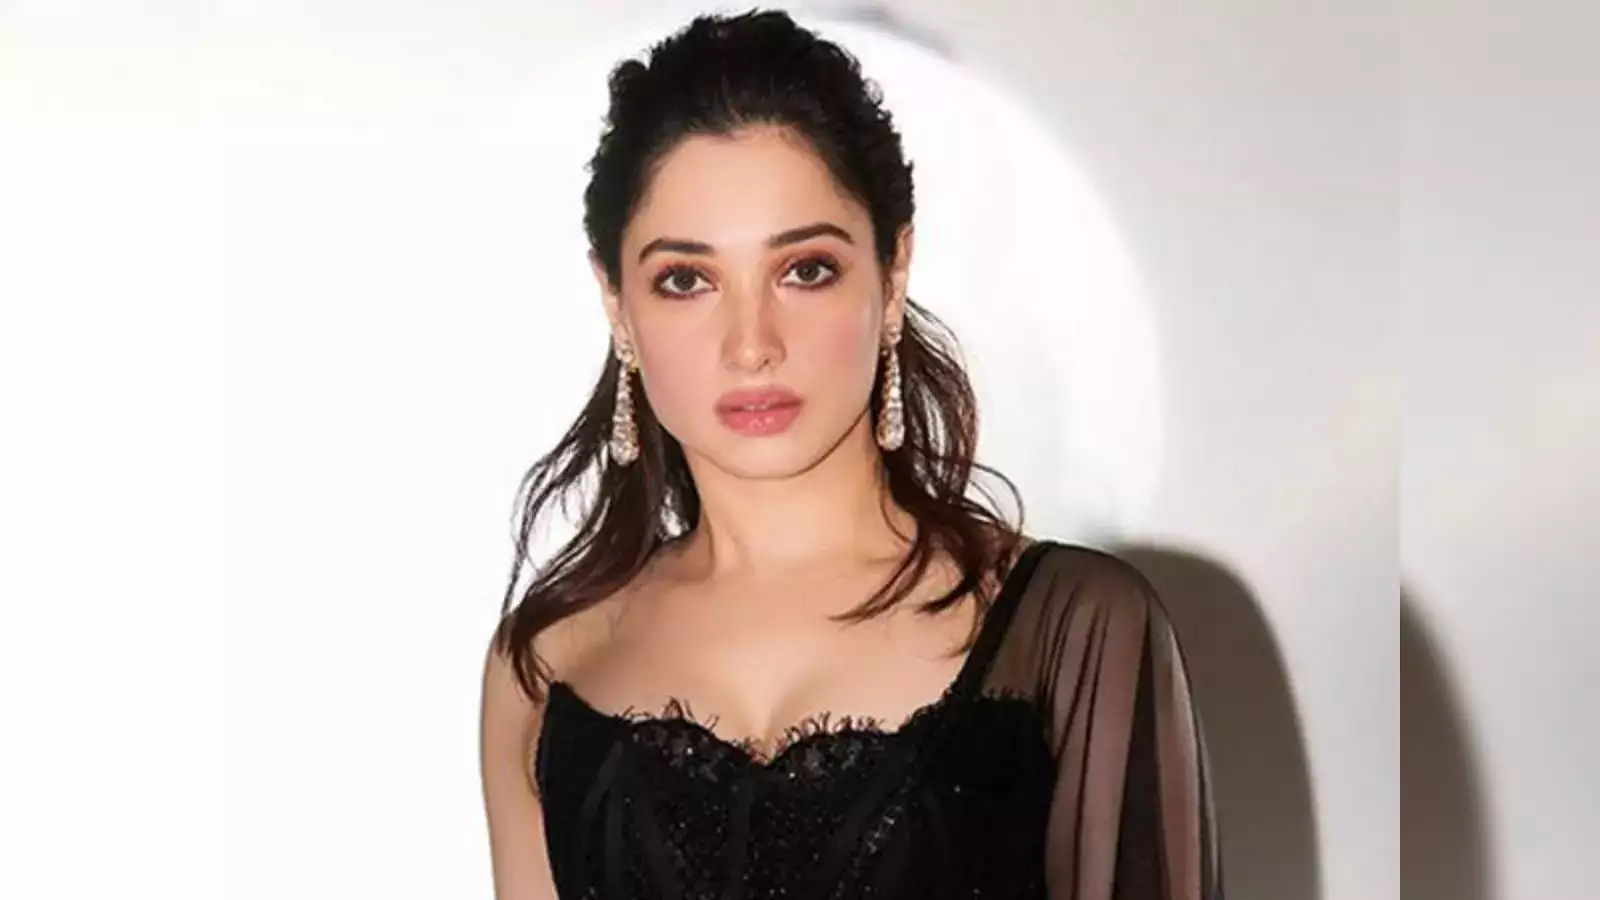 Tamannaah Bhatia, the actress, summoned in illegal IPL streaming case.